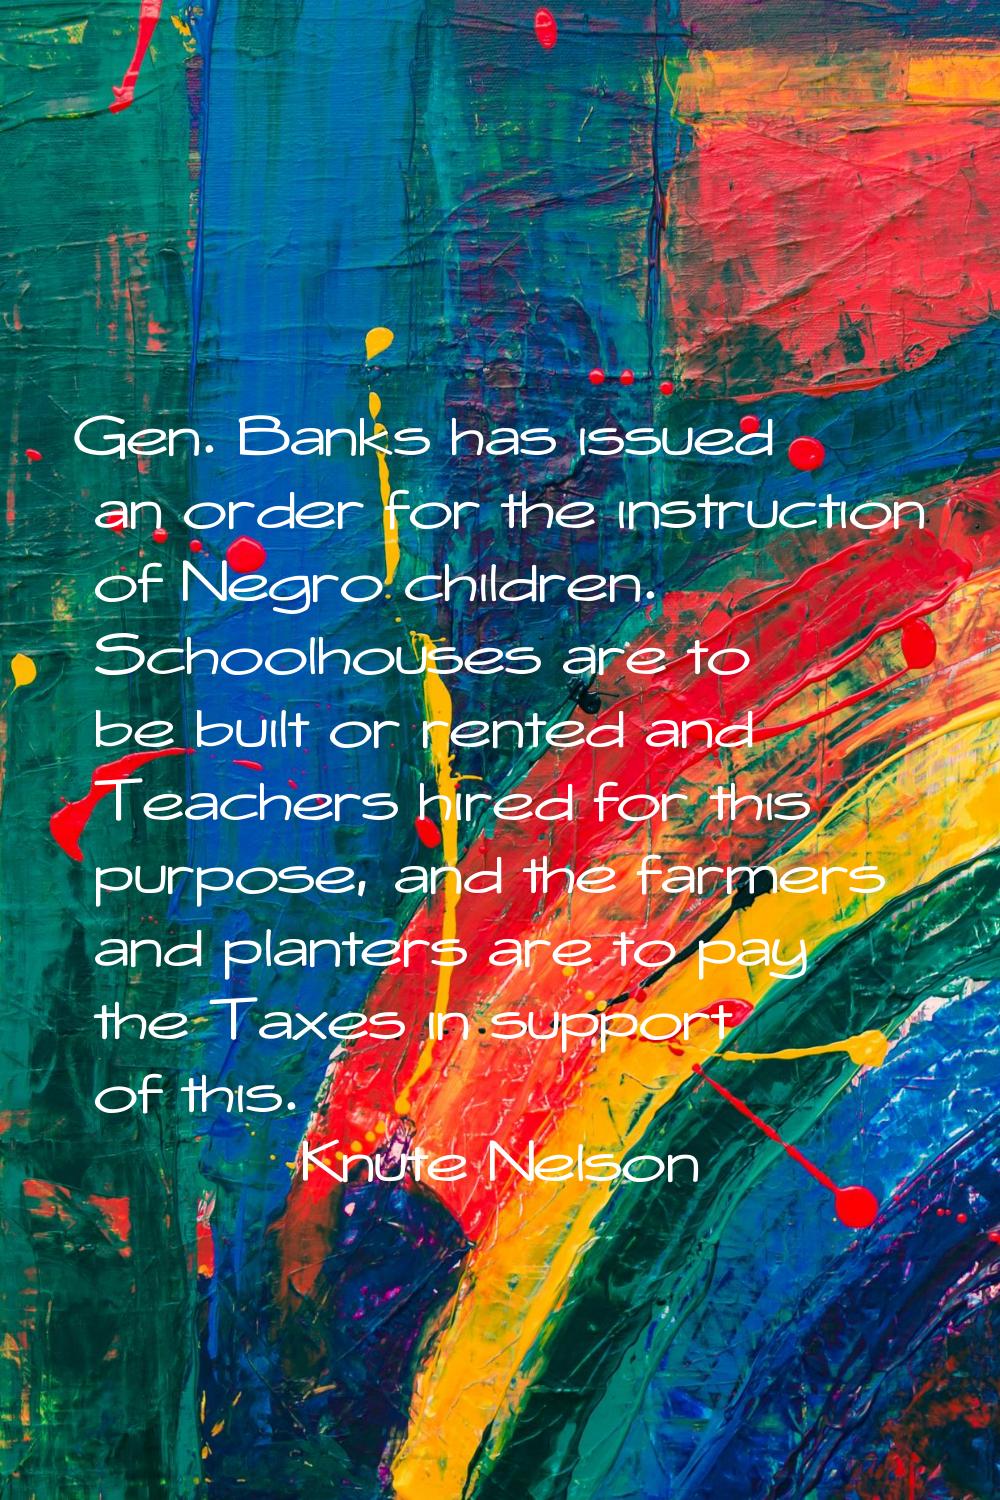 Gen. Banks has issued an order for the instruction of Negro children. Schoolhouses are to be built 